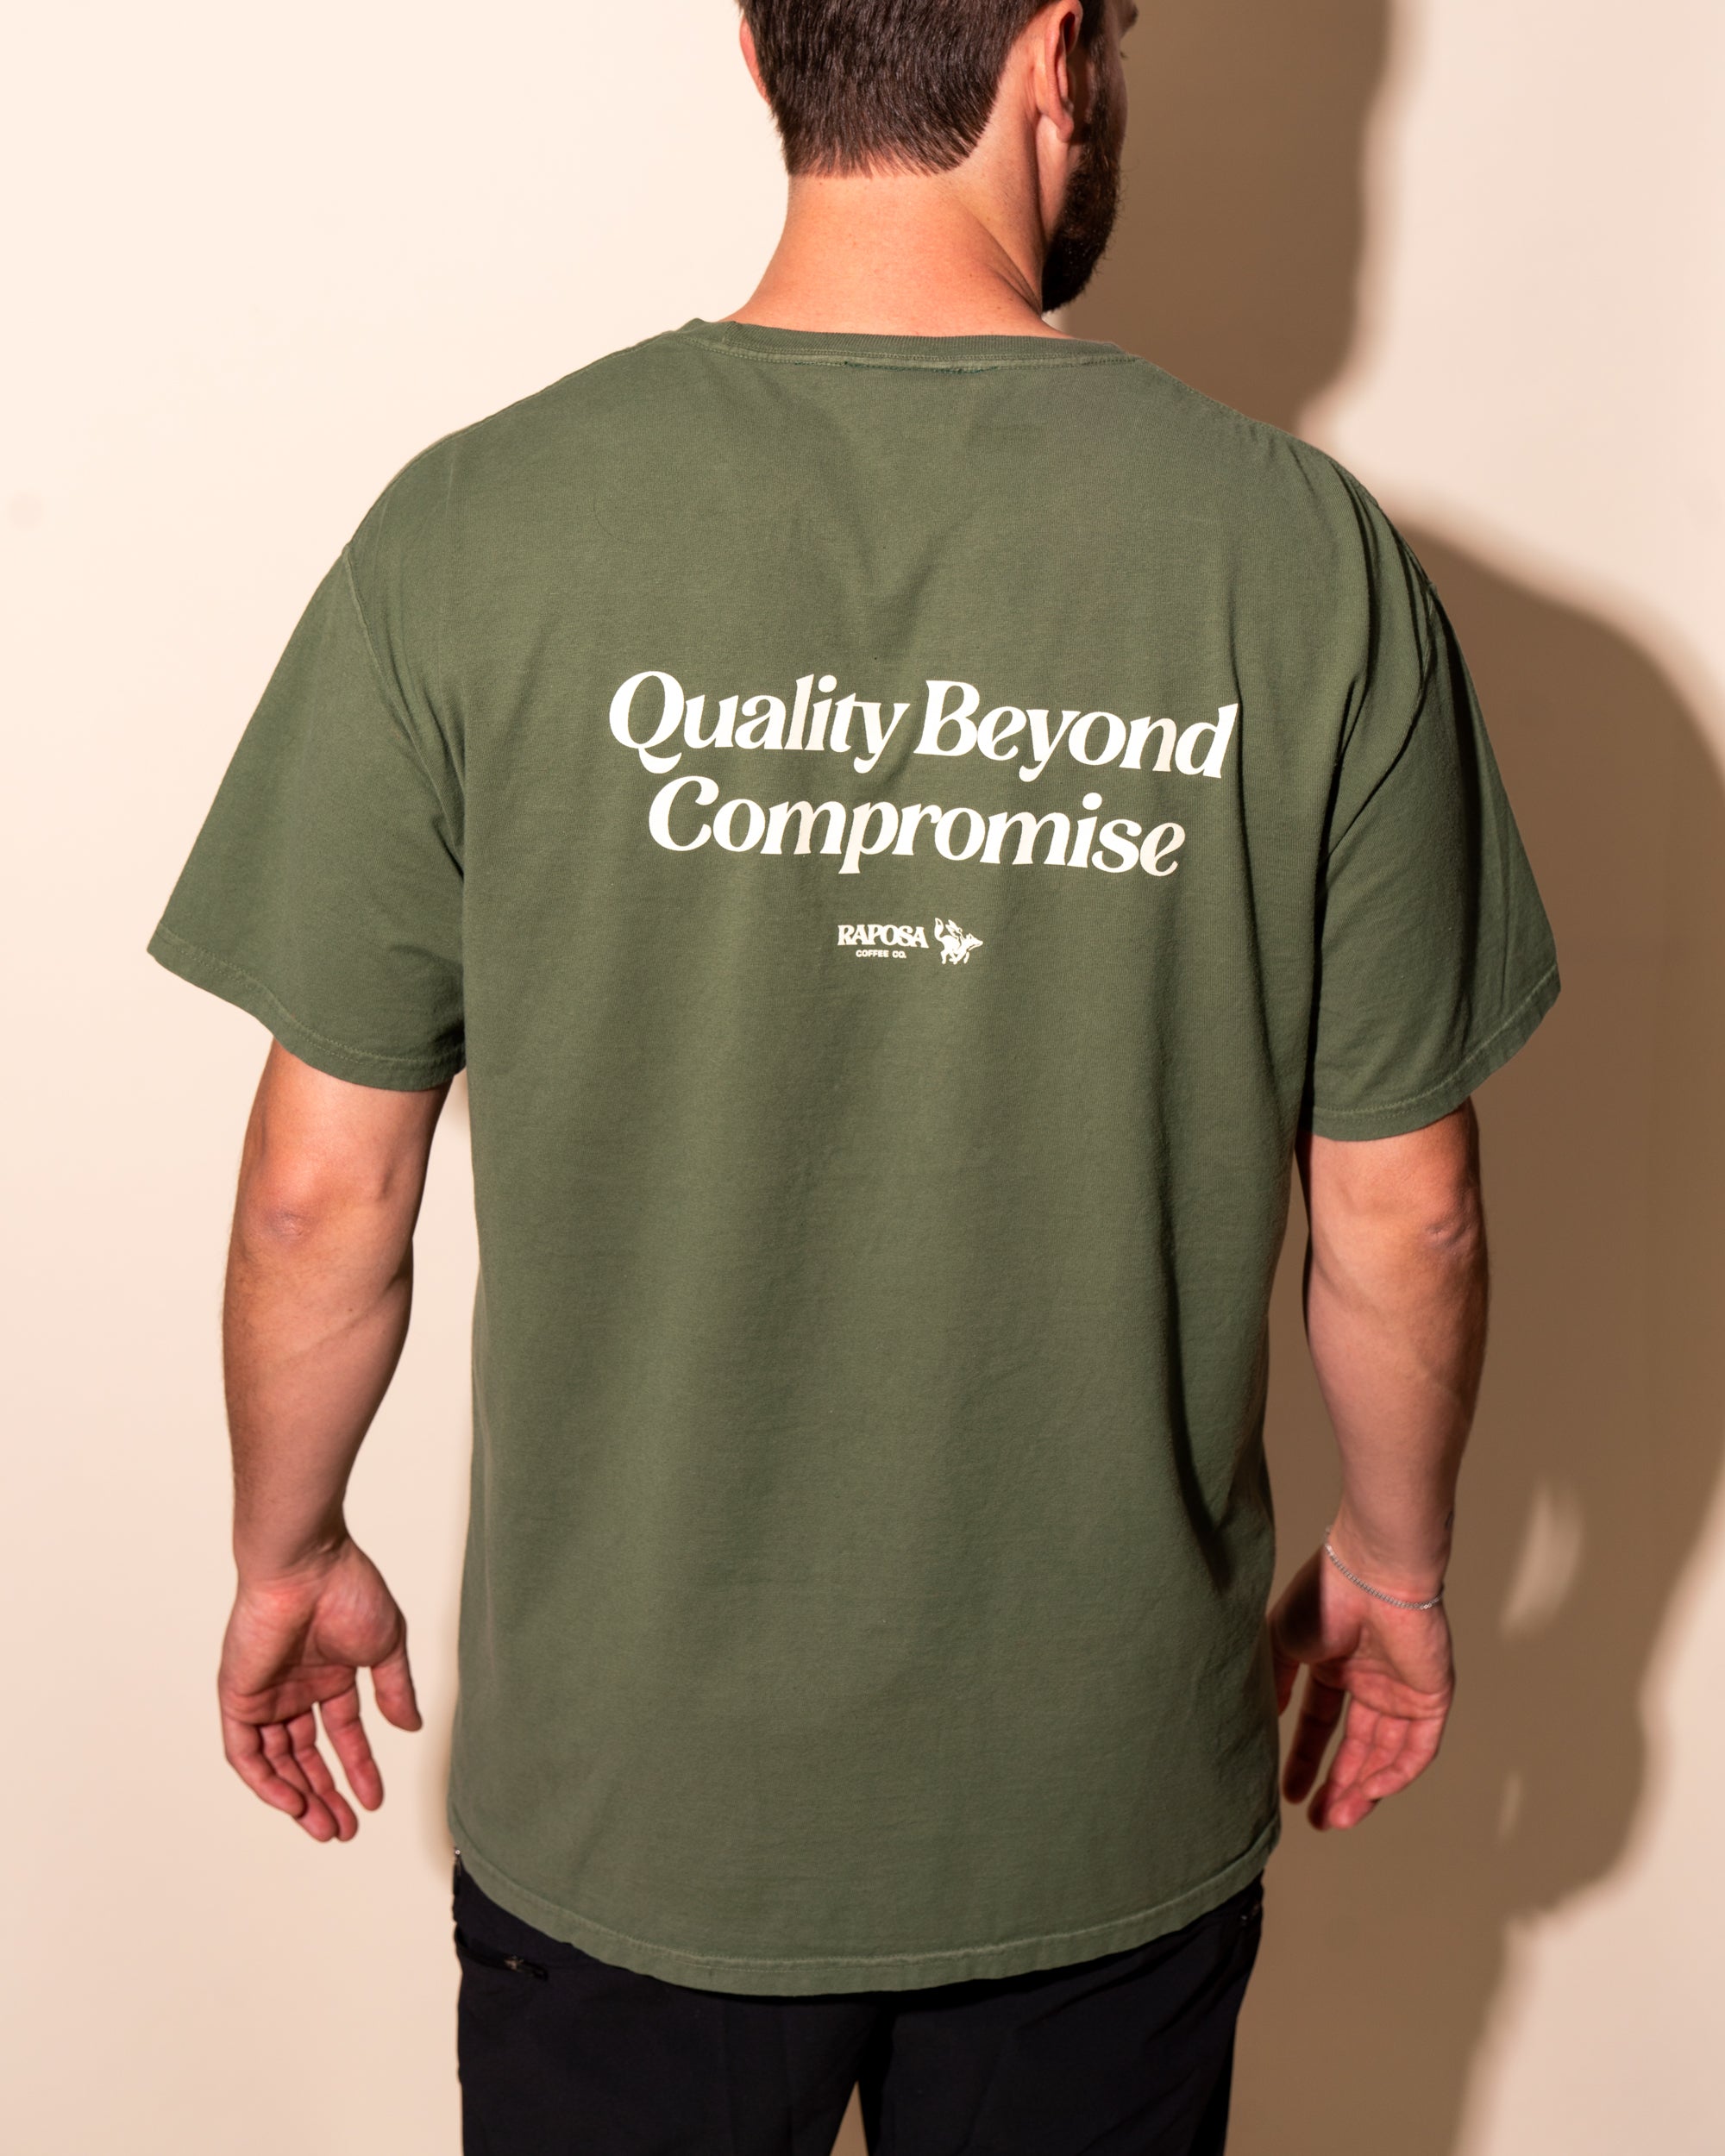 Quality Beyond Compromise Shirt